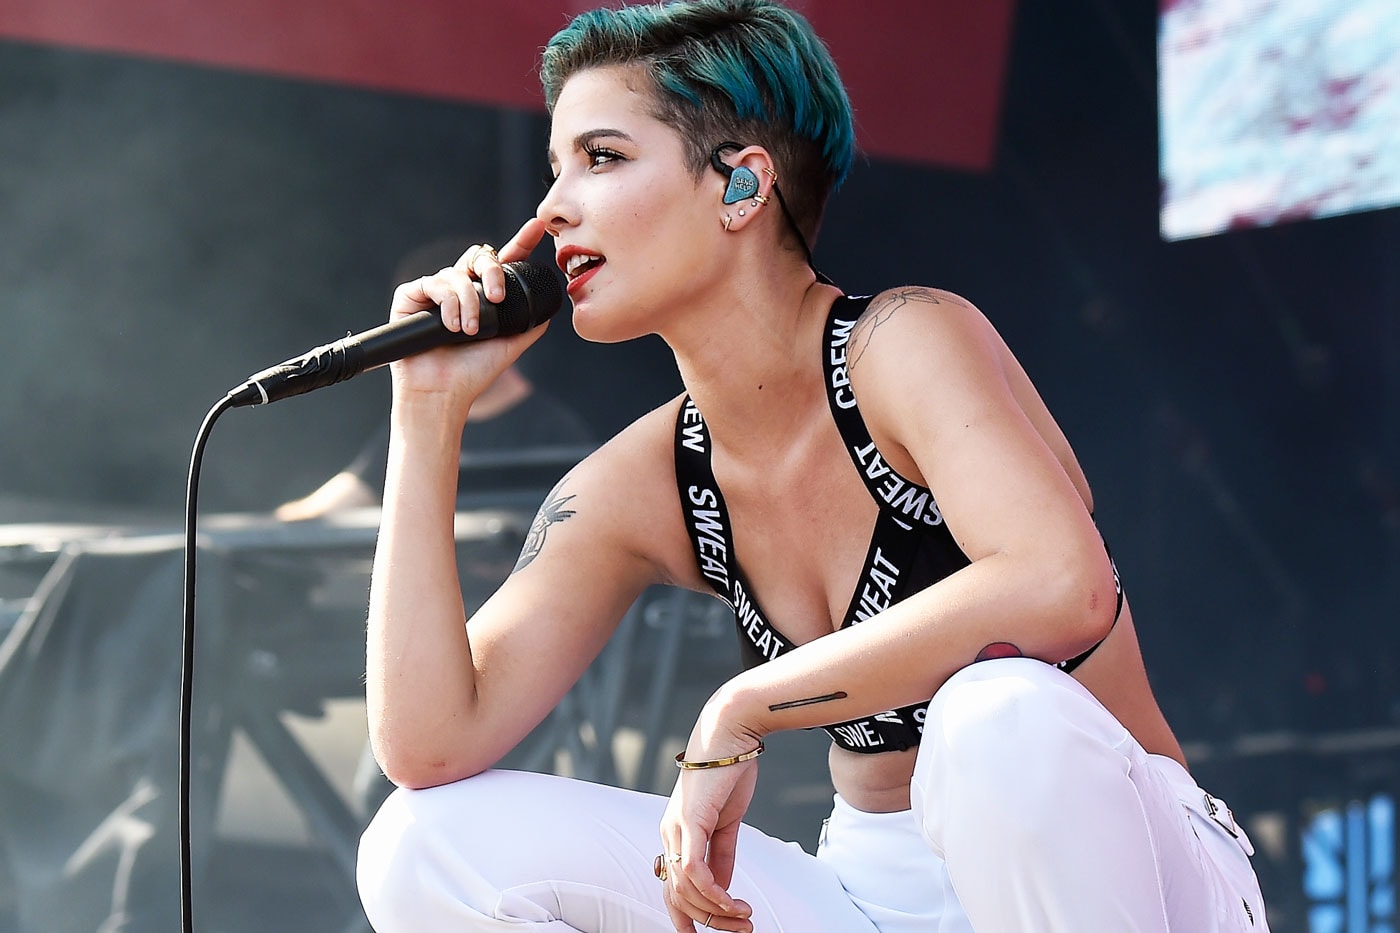 Halsey Mashes Justin Bieber's "What Do You Mean" with The Weeknd's "Often" In New Cover